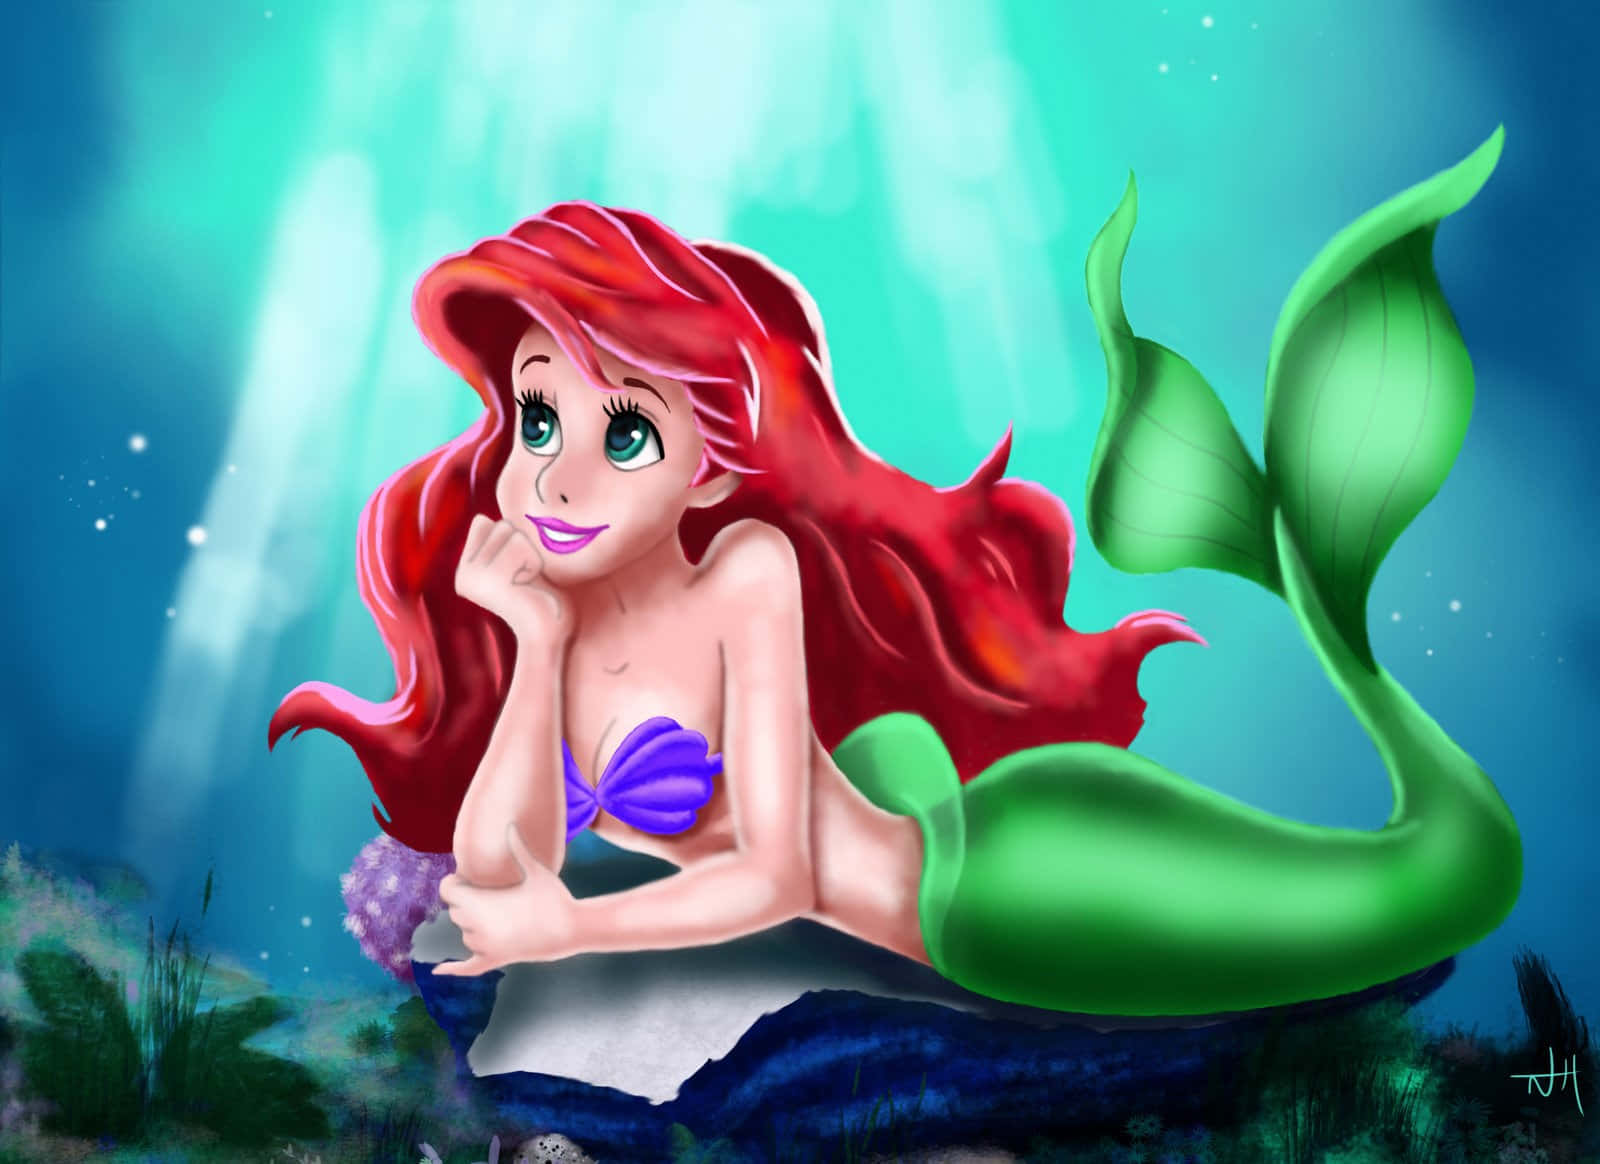 Image  Ariel's amazing transformation from mermaid to human.